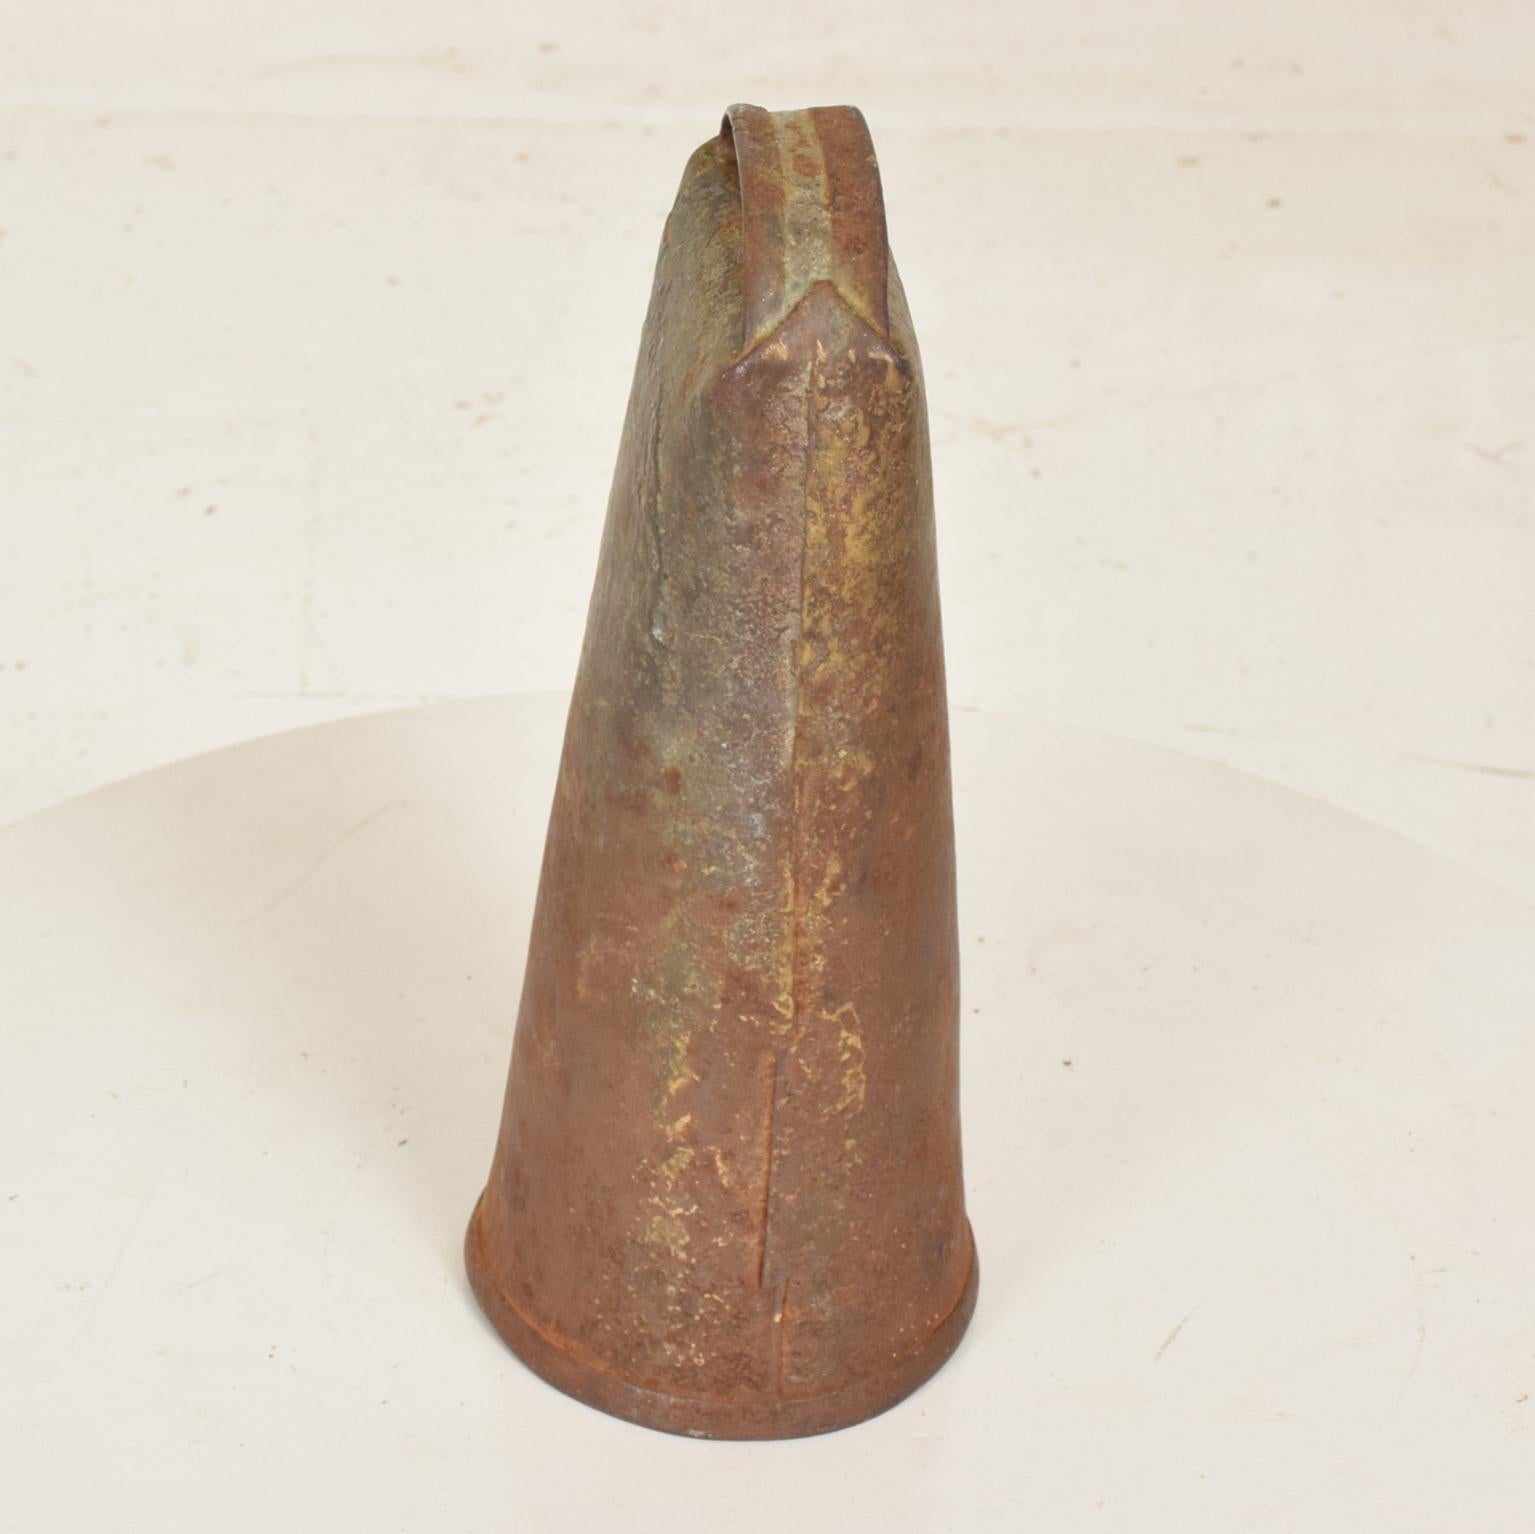 Vintage antique decorative cow bell in metal and wood.
USA circa the 1930s.
Dimensions: 10 3/4